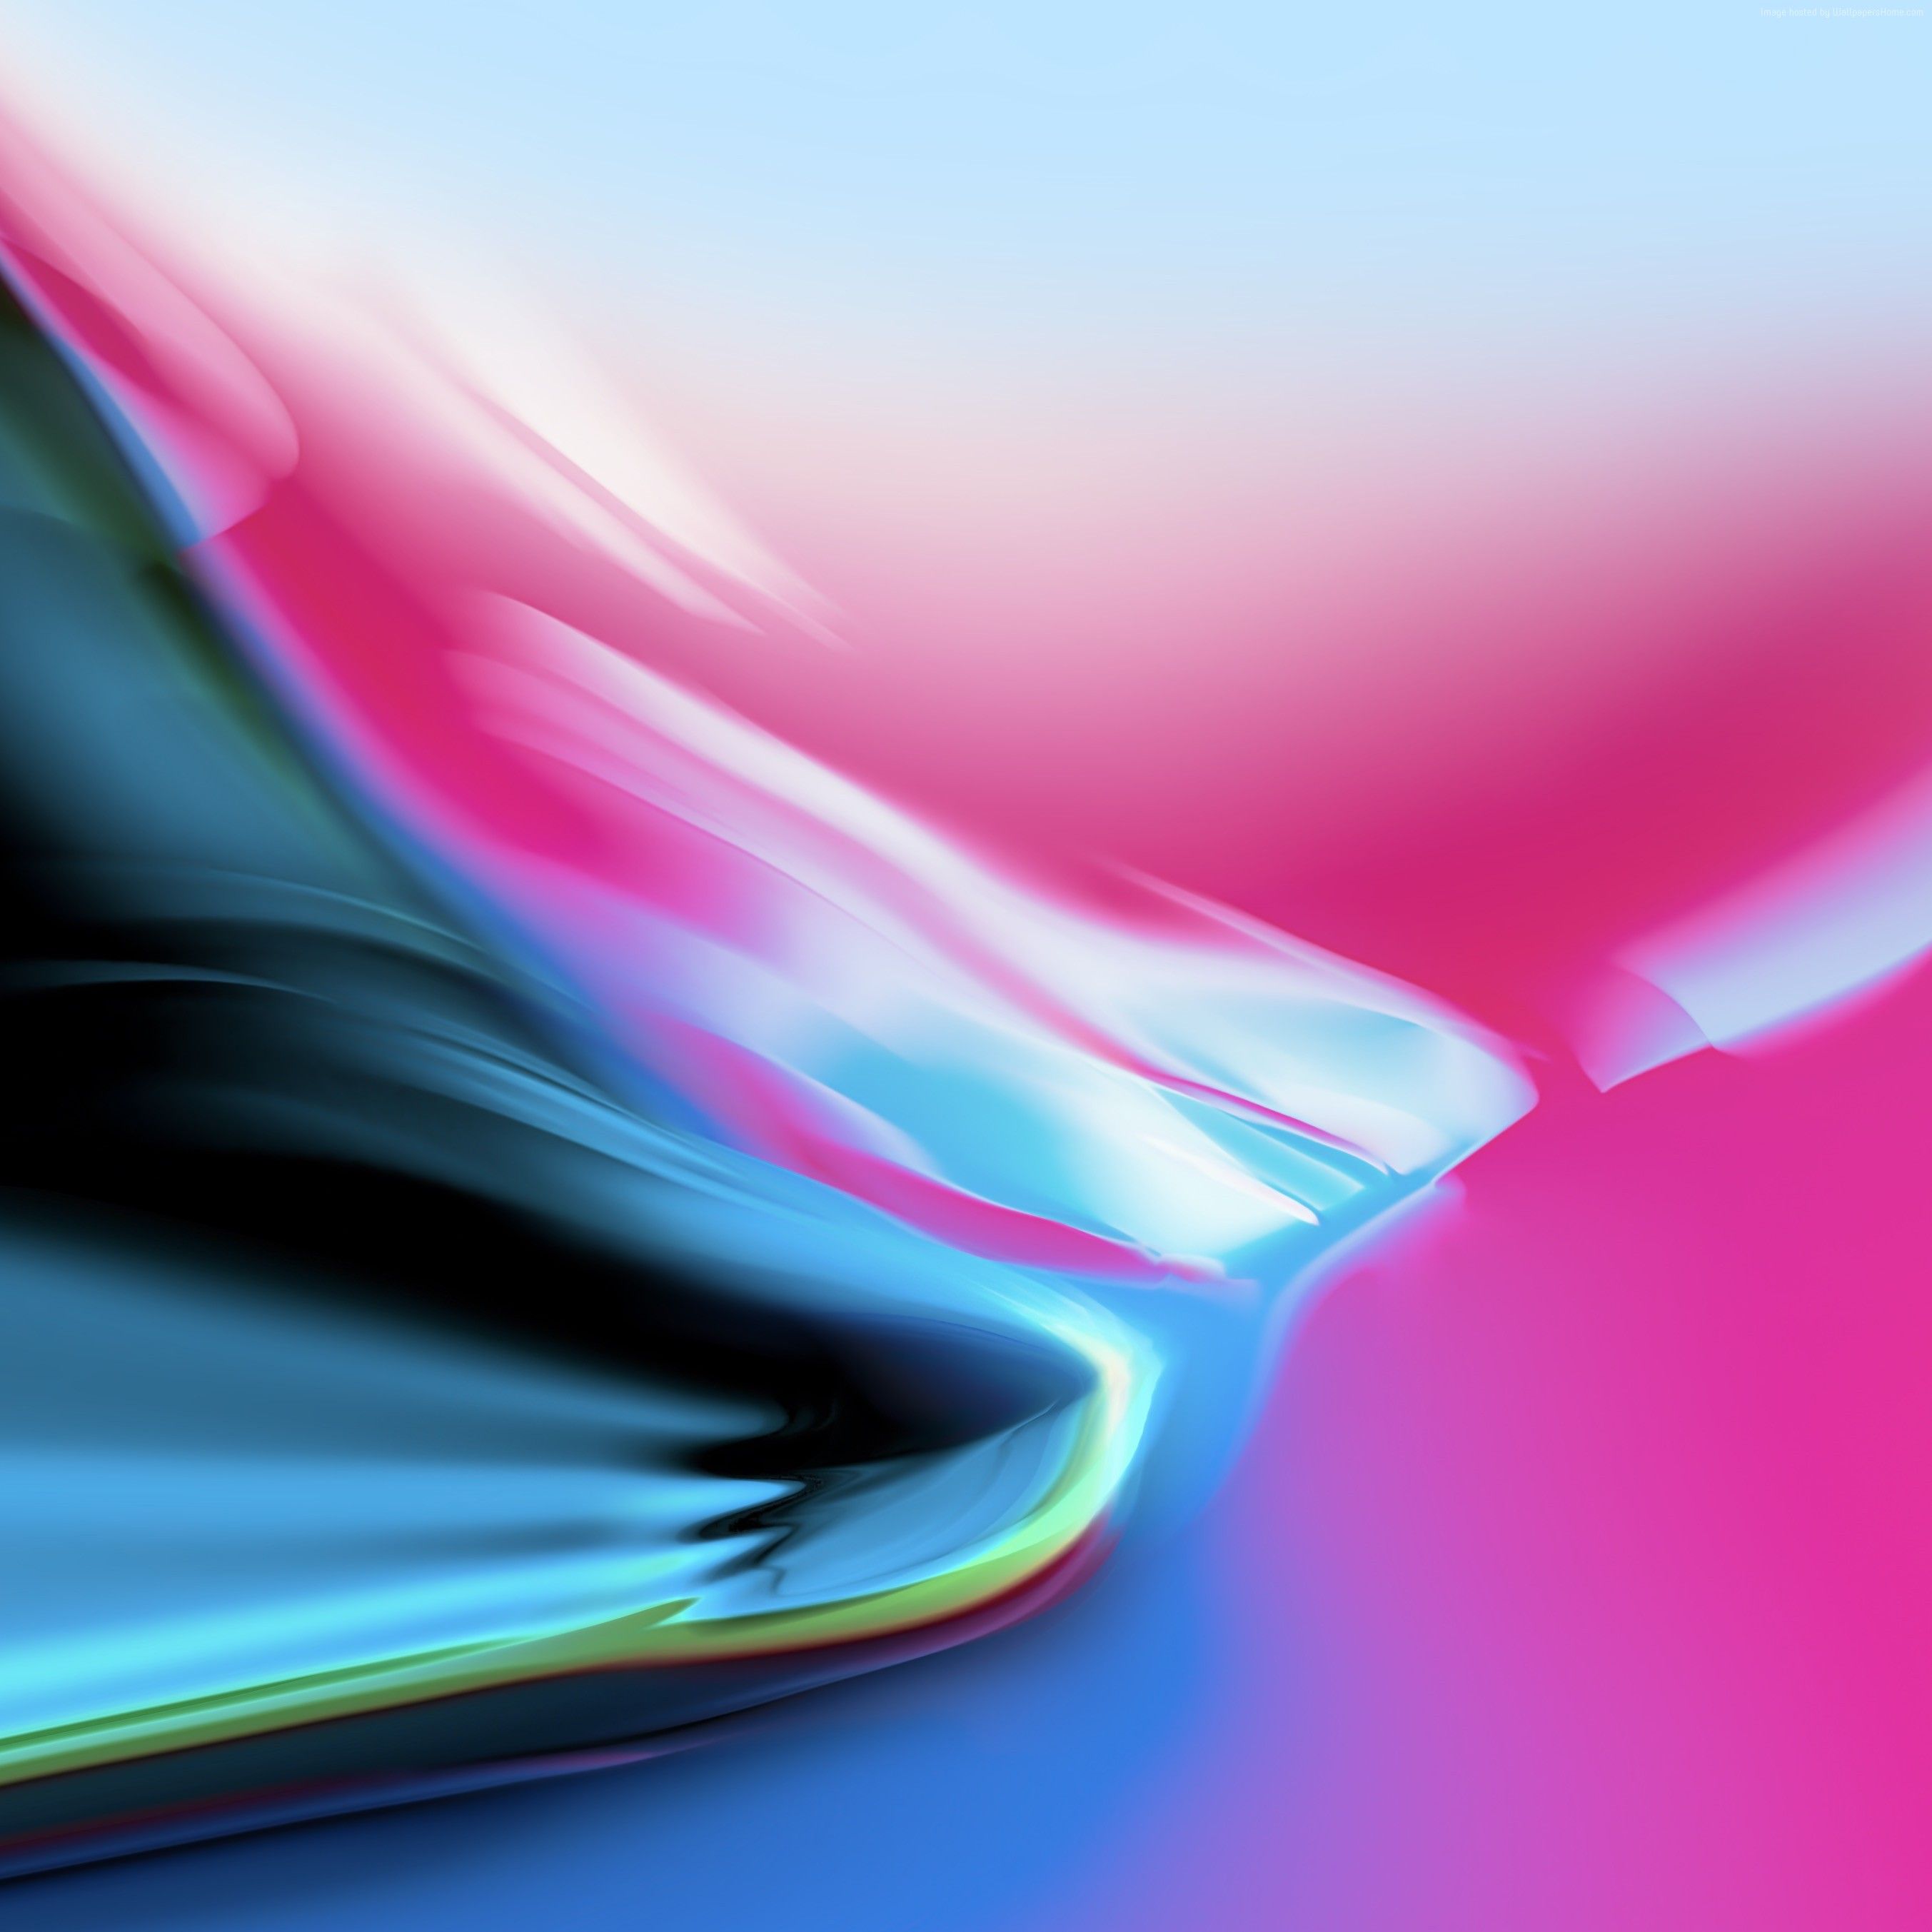 The new iPhone X Wallpapers download free 